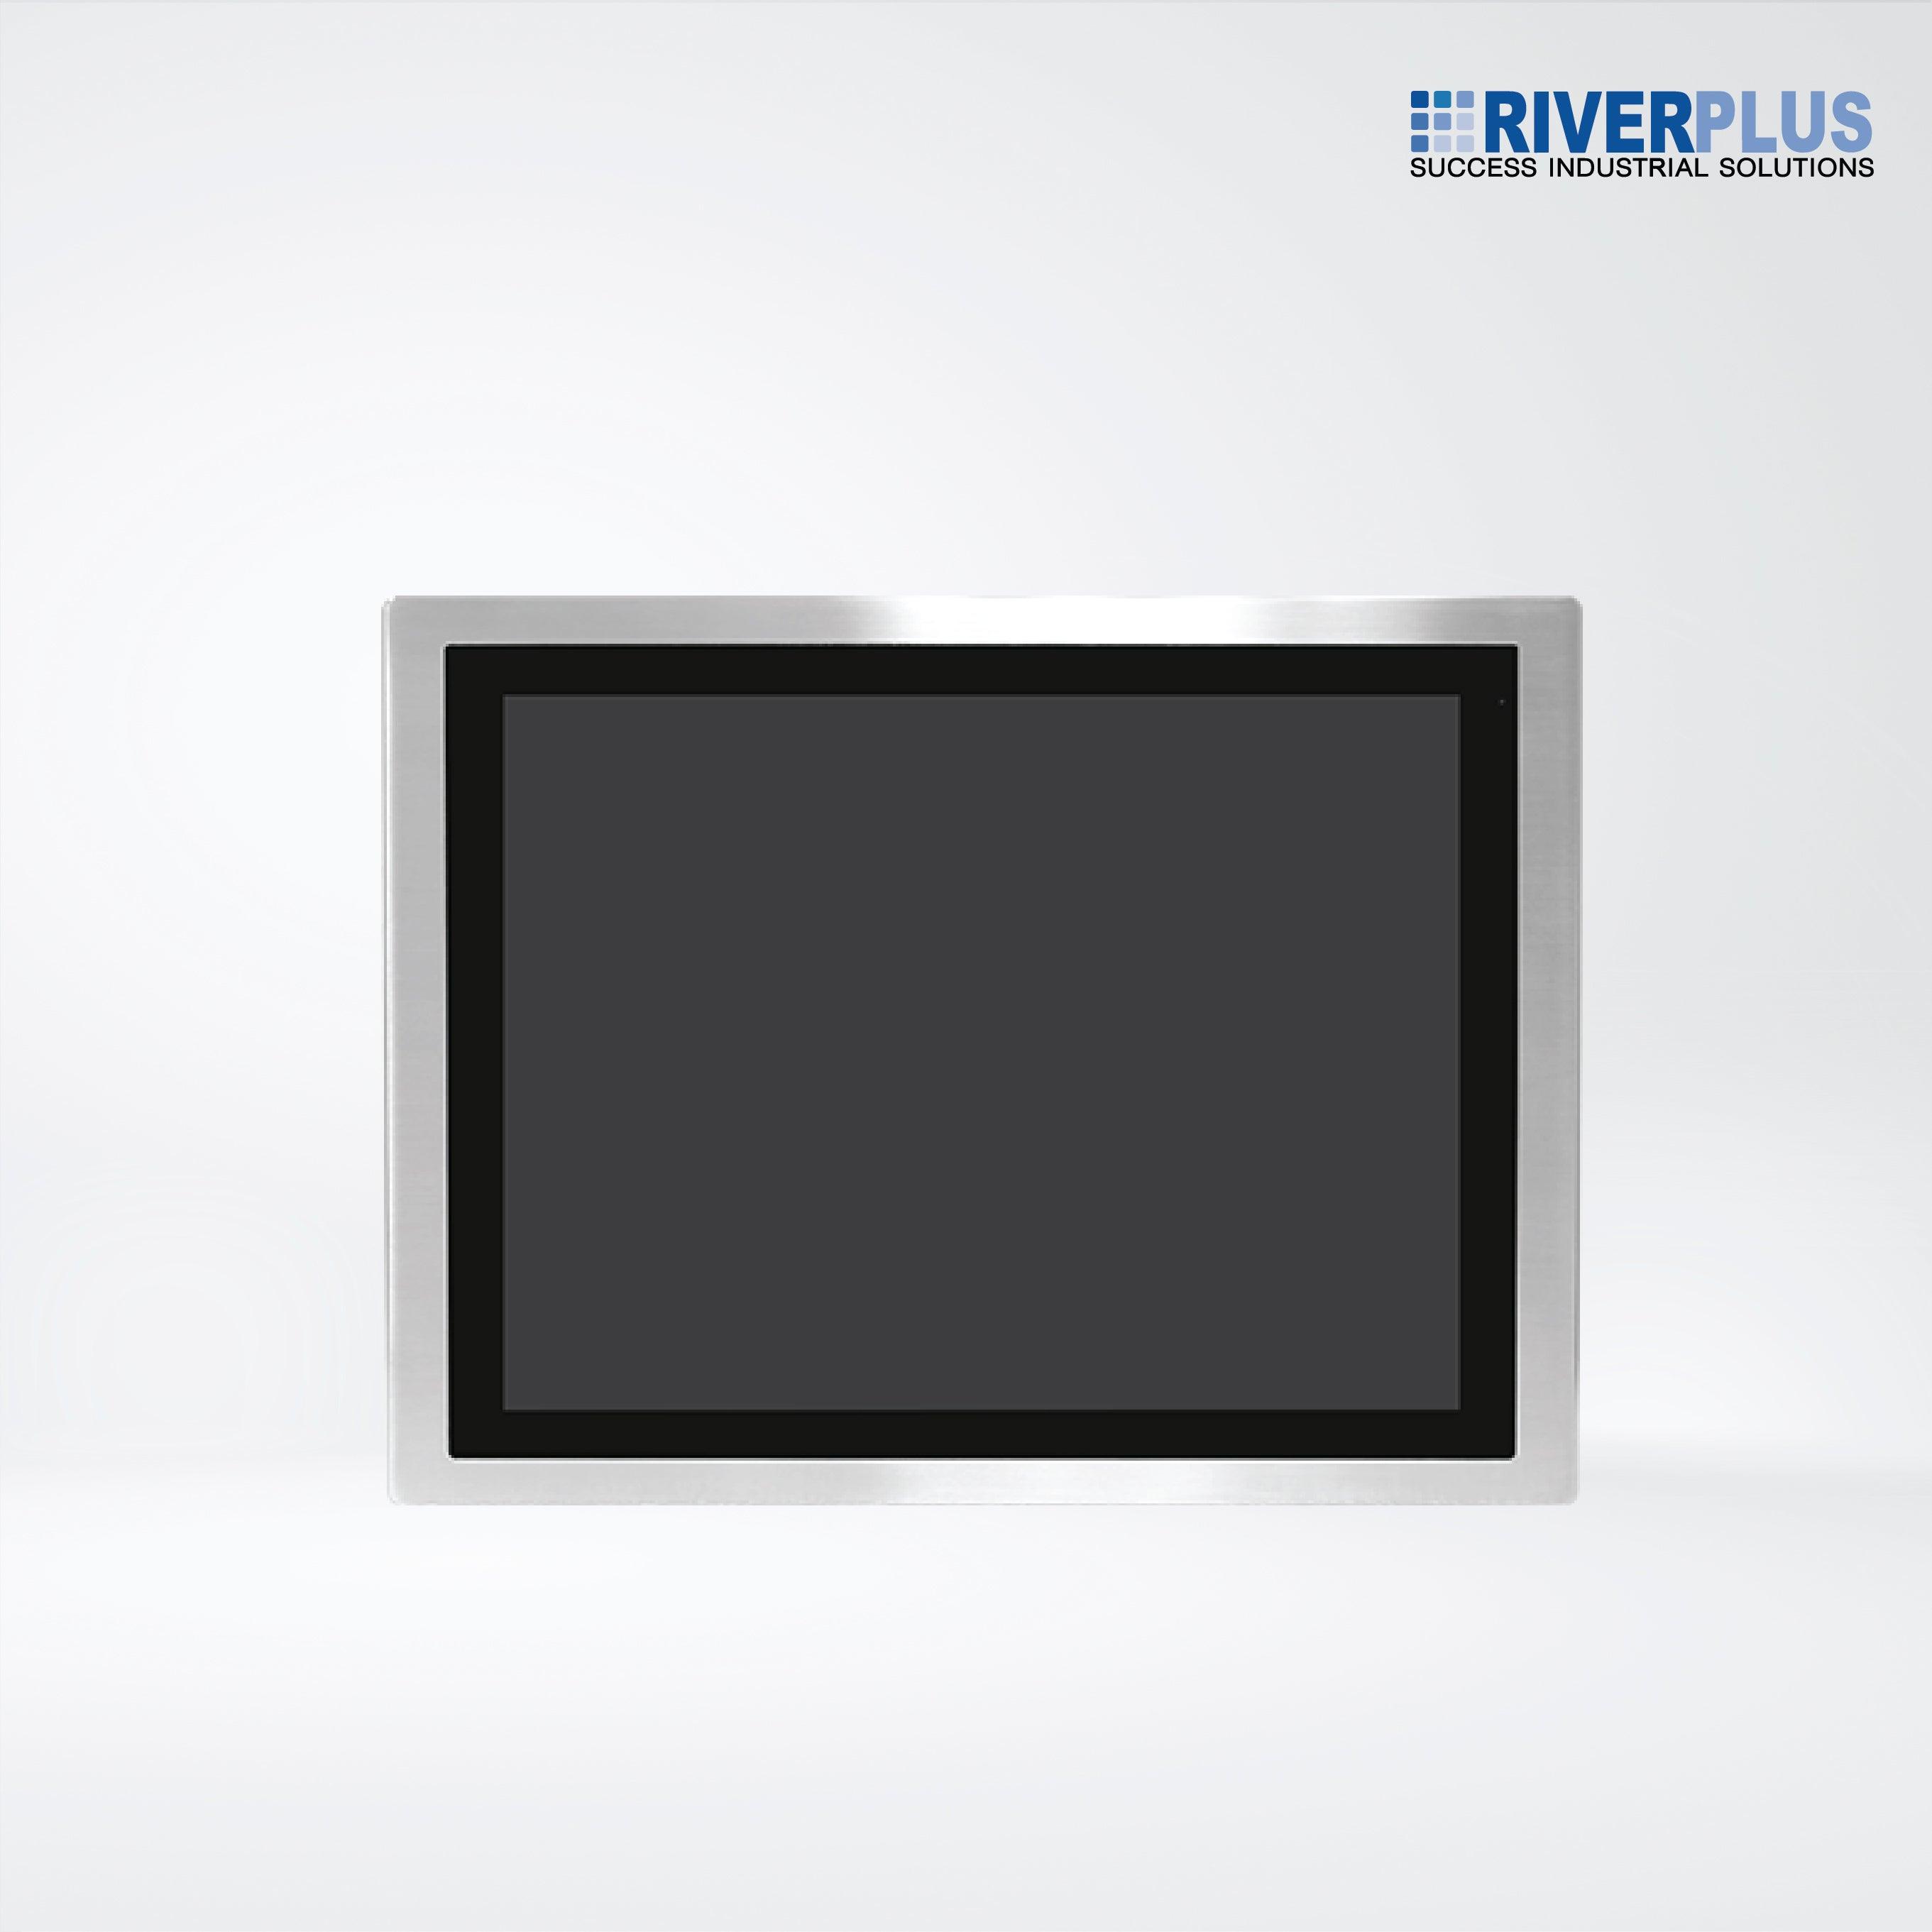 FABS-119P 19” Flat Front Panel IP66 Stainless Chassis Display - Riverplus